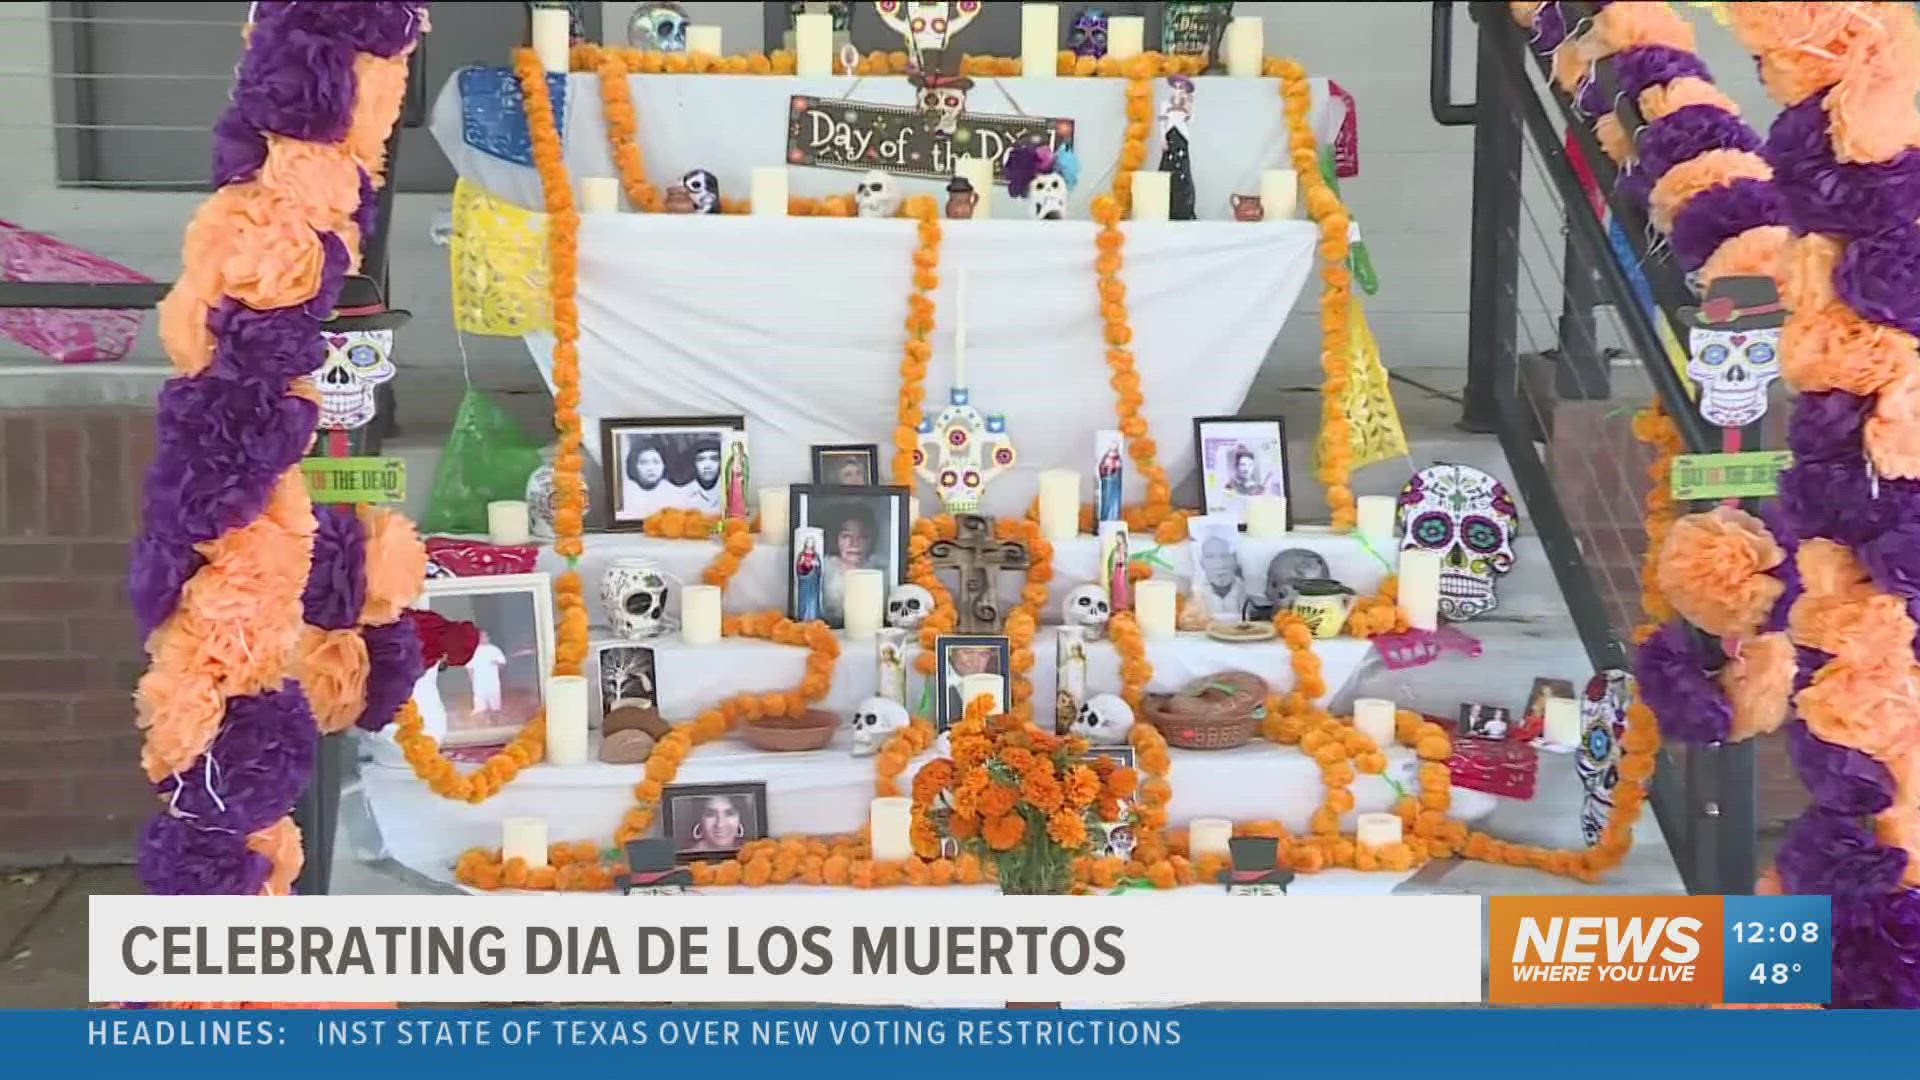 Since Día de Los Muertos was on a weekday this year, people are planning to celebrate the holiday this weekend.